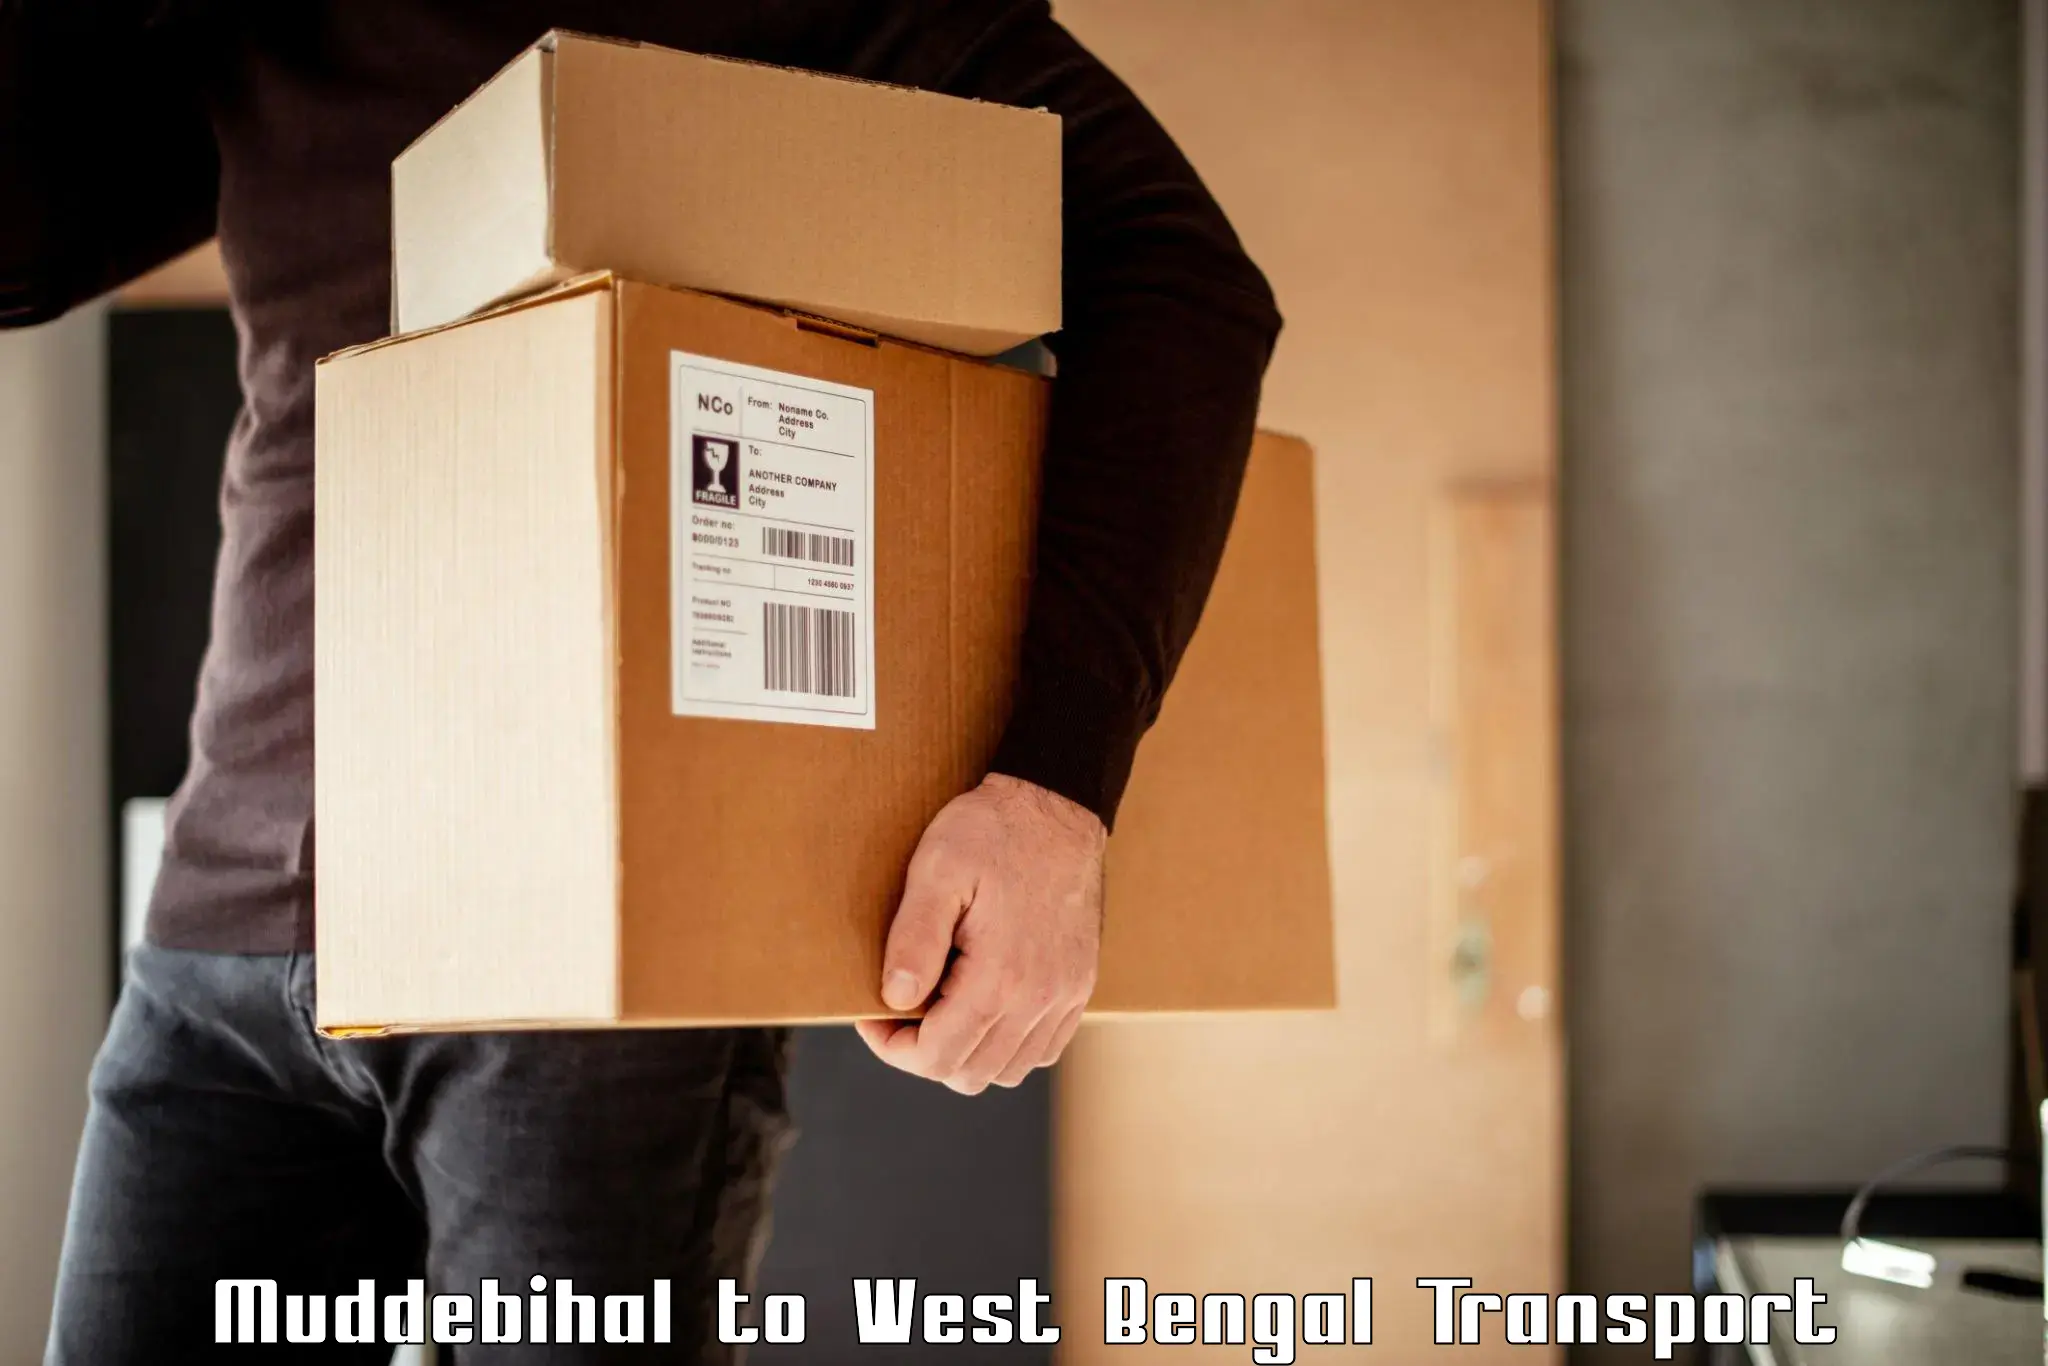 Express transport services Muddebihal to West Bengal